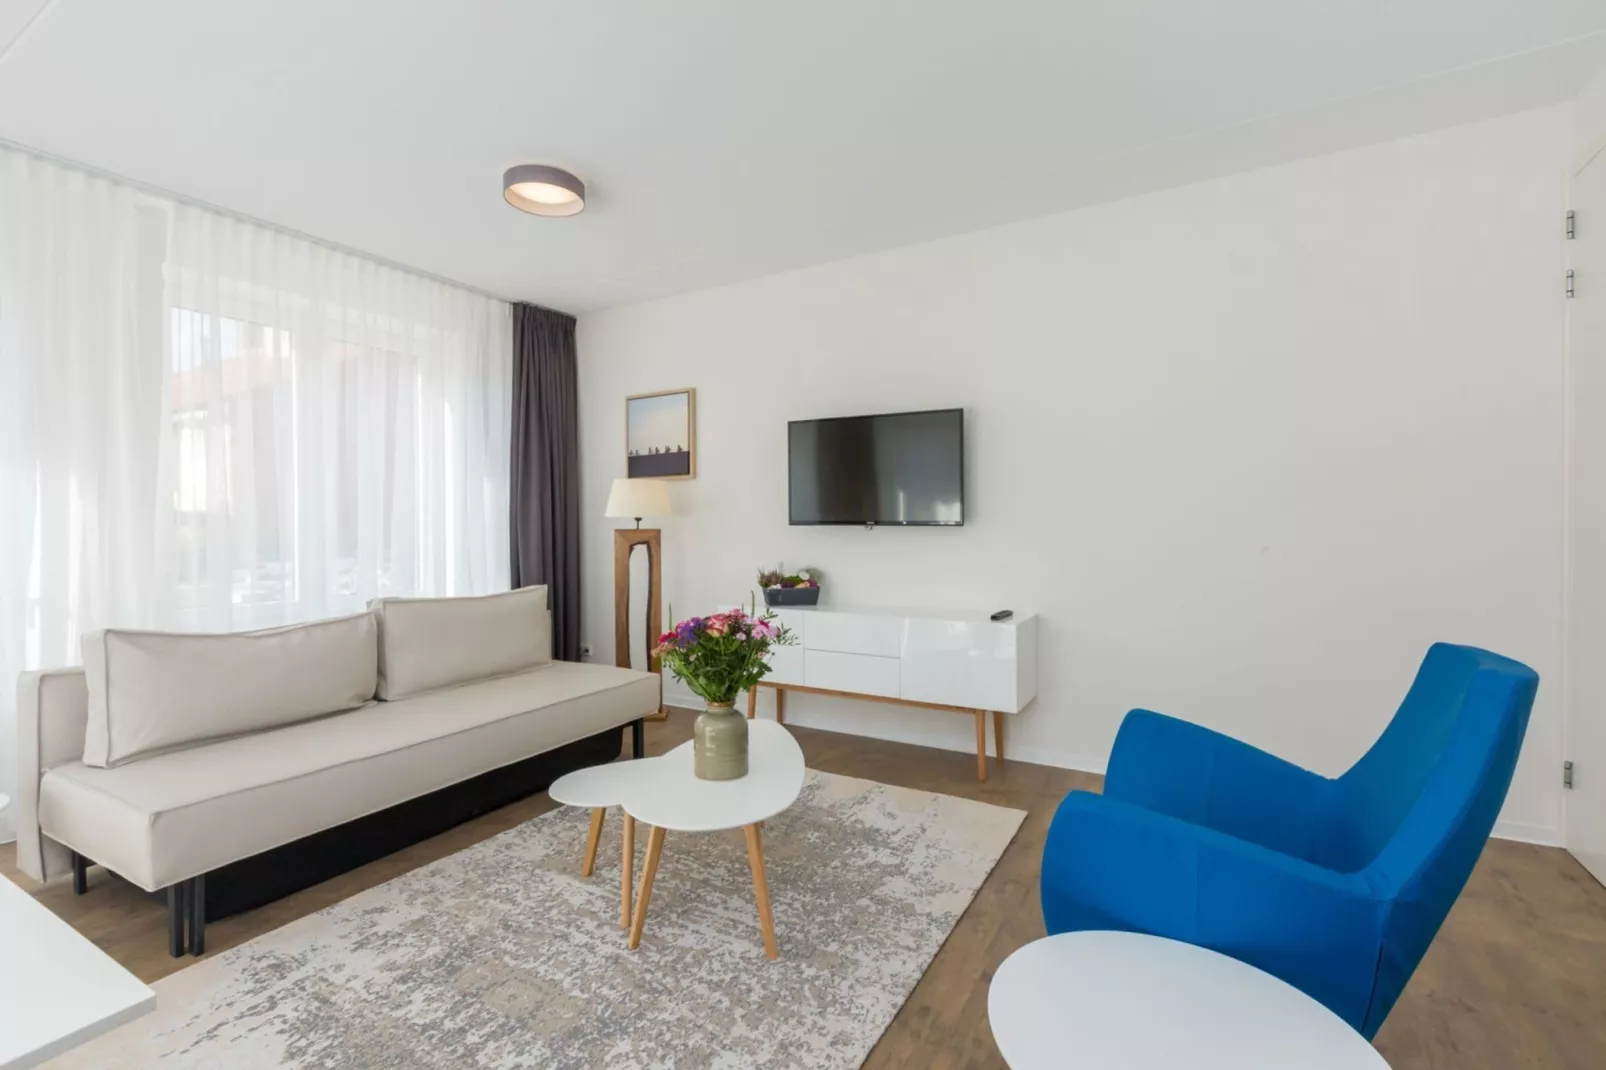 Aparthotel Zoutelande - Luxe 2-persoons comfort appartement-Woonkamer